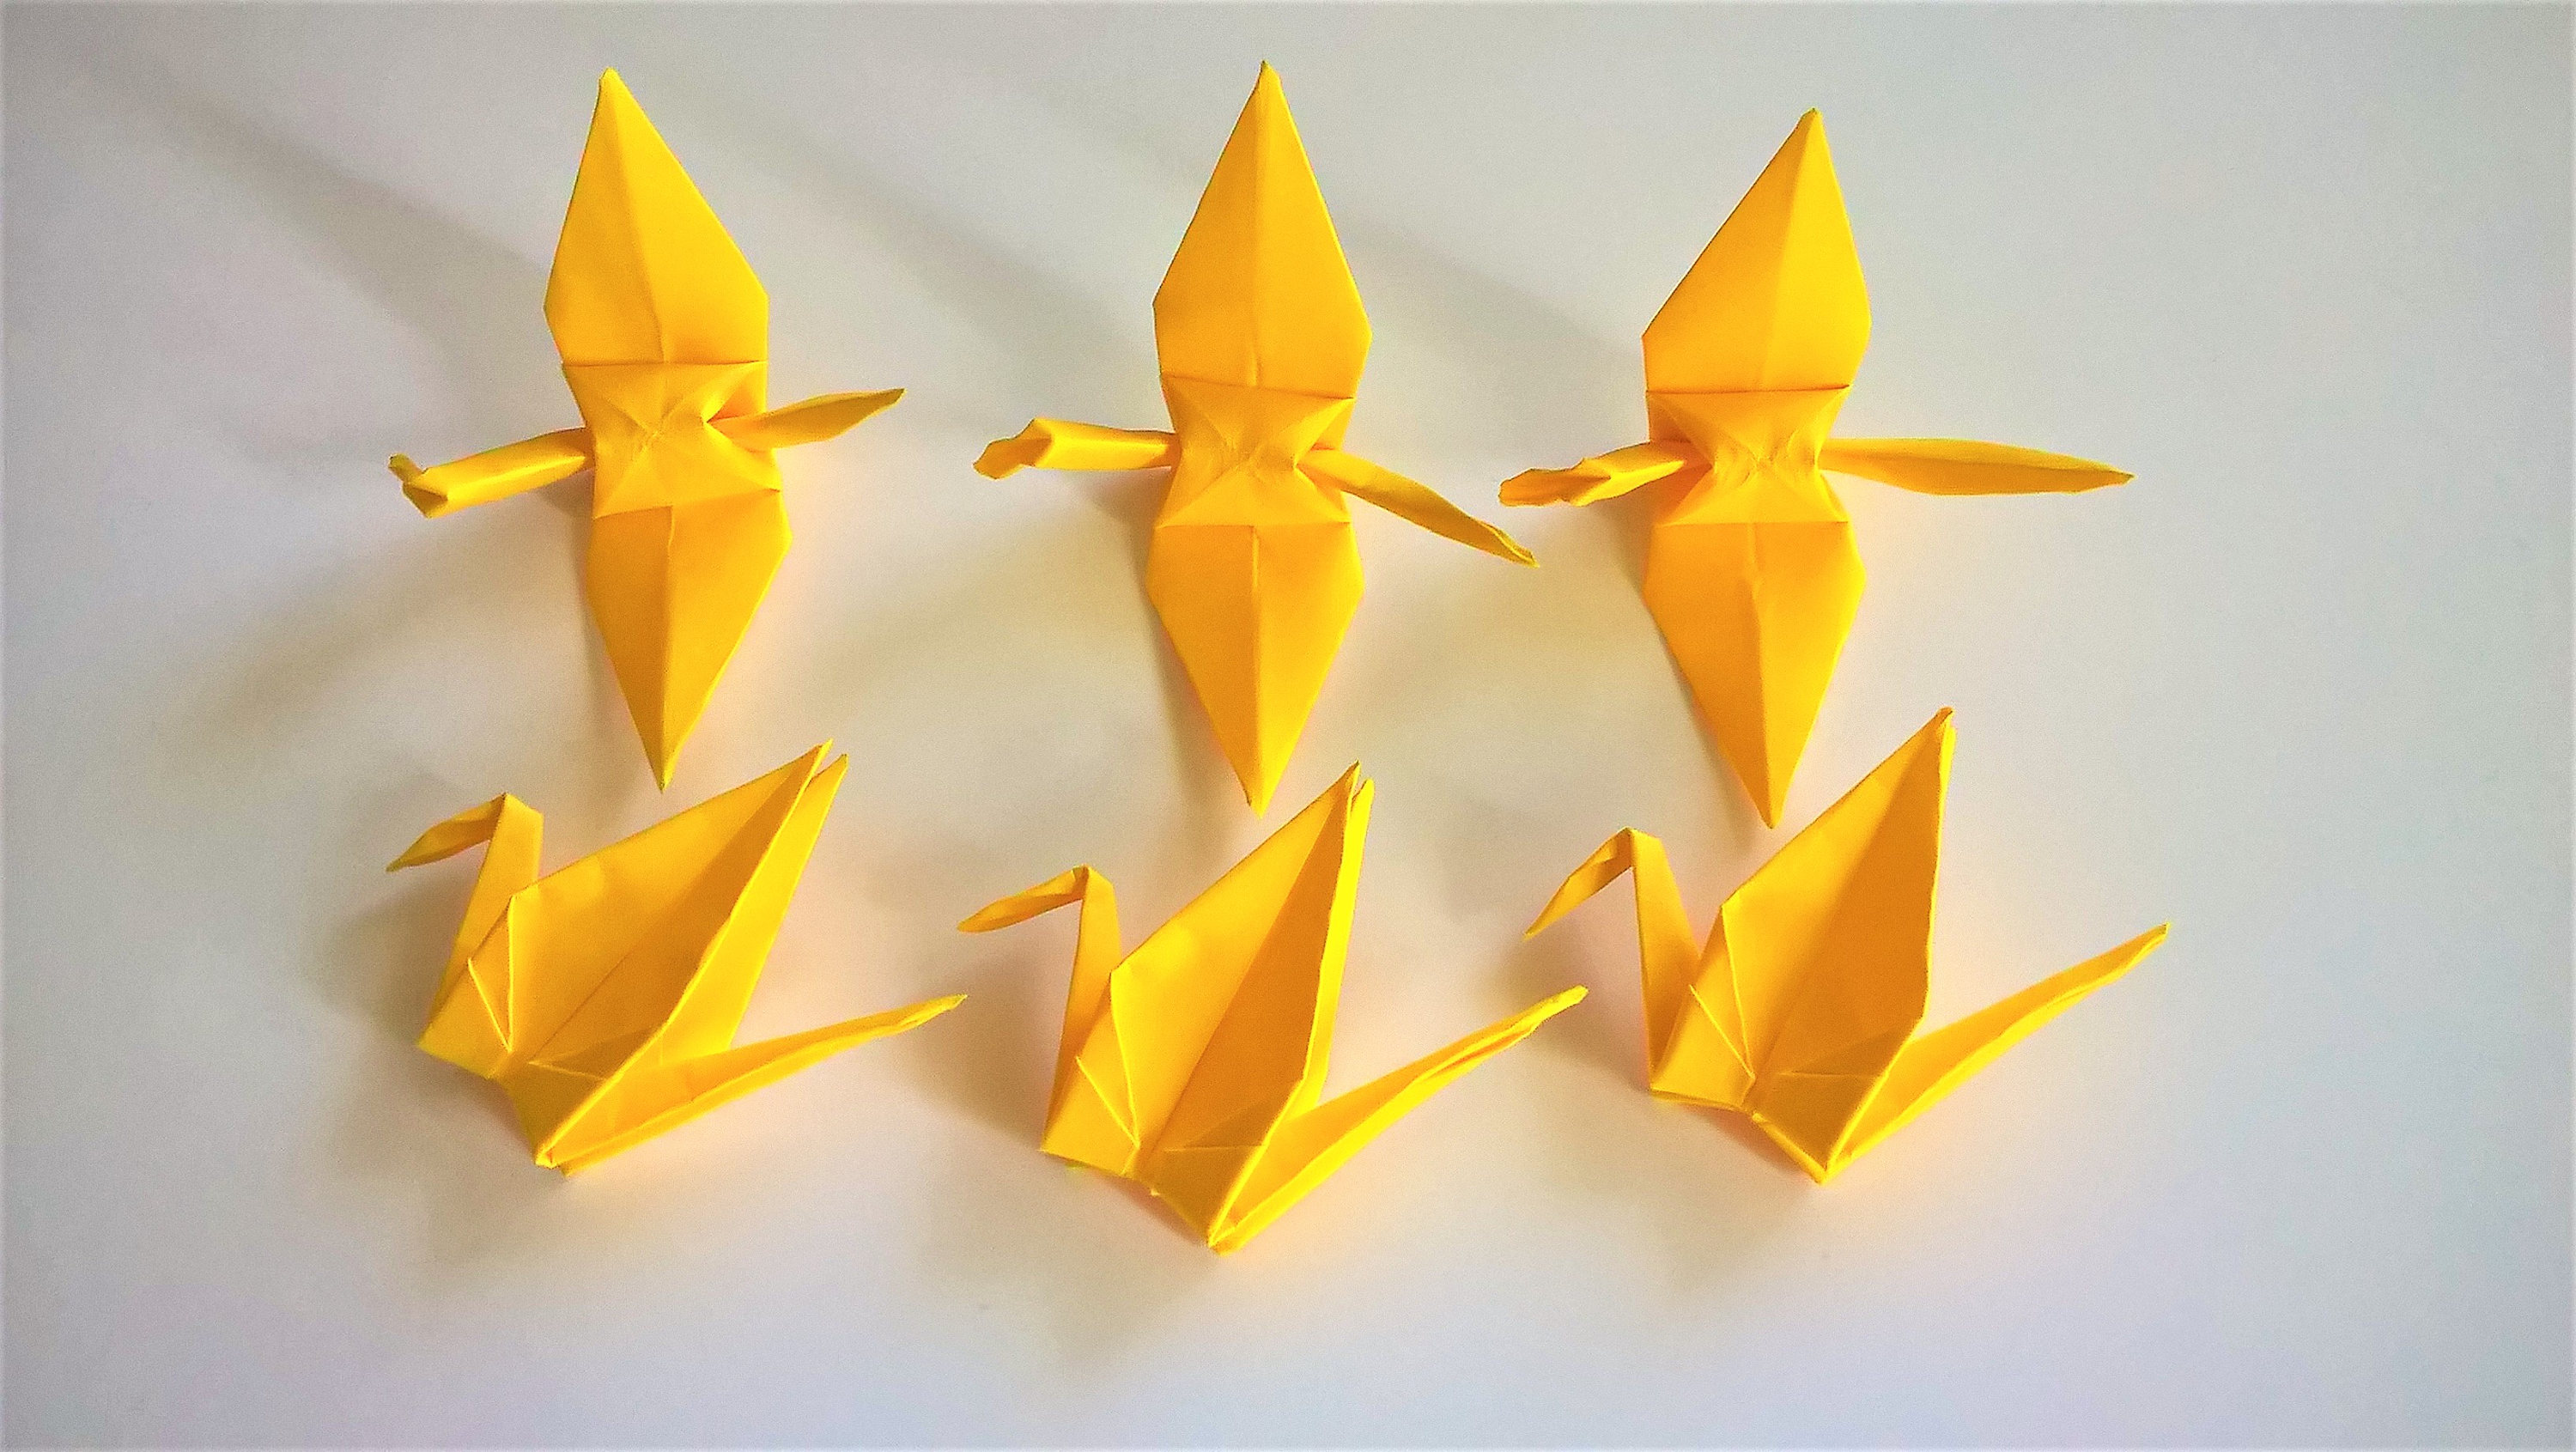 100 Gold Origami Paper Sheets Paper Pack Origami Paper Cranes 3x3 Inches  for Folding Paper , Origami Cranes , Origami Decoration 